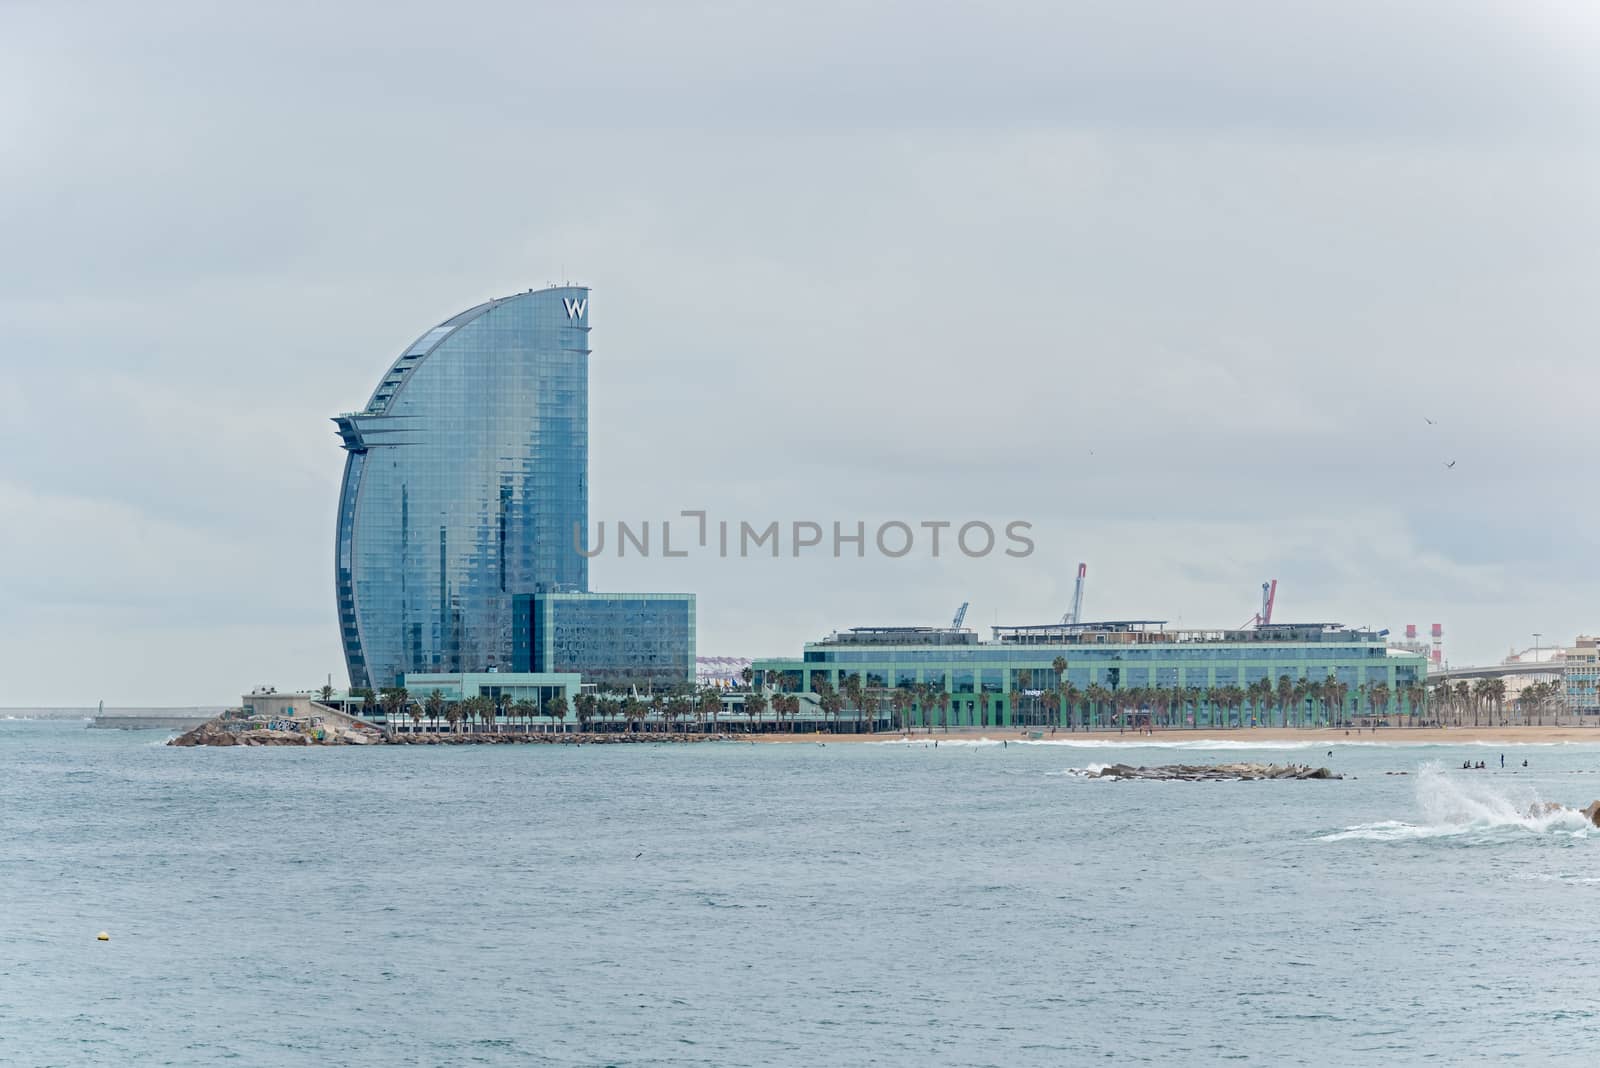 Barcelona, Spain - January 25, 2014: View at the Port and W Barcelona, popularly known as the Hotel Vela (Sail Hotel) due to its shape.It  is a building designed by Ricardo Bofill is located in the Barceloneta district of Barcelona, in the expansion of the Port of Barcelona. 